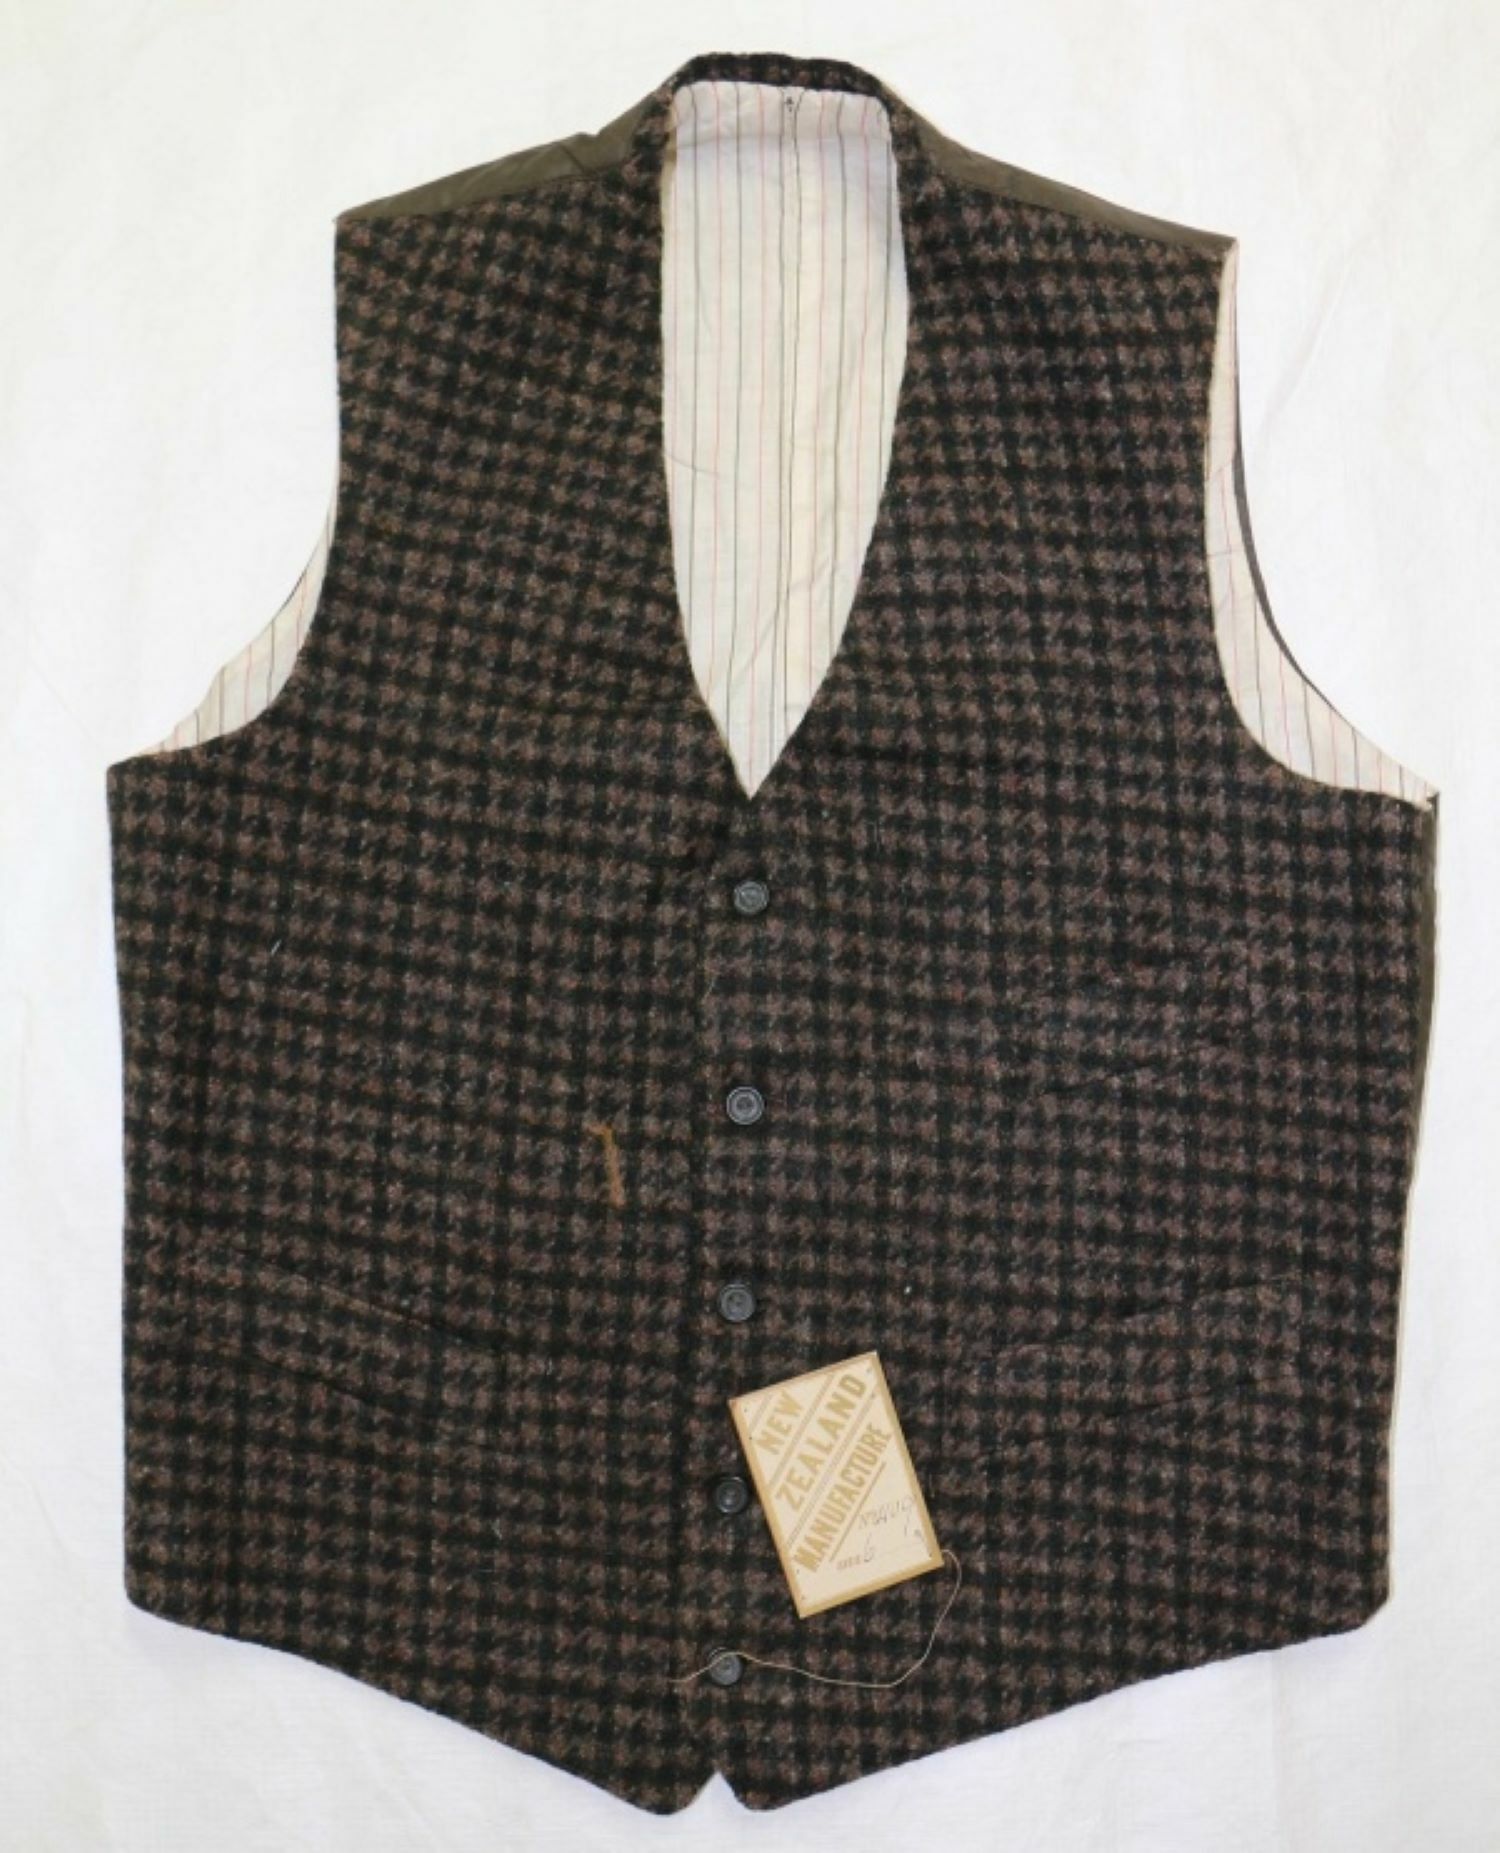 Waistcoat, part of a three piece suit recovered from the Antipodes Island castaway depot. Canterbury Museum 1948.46.3